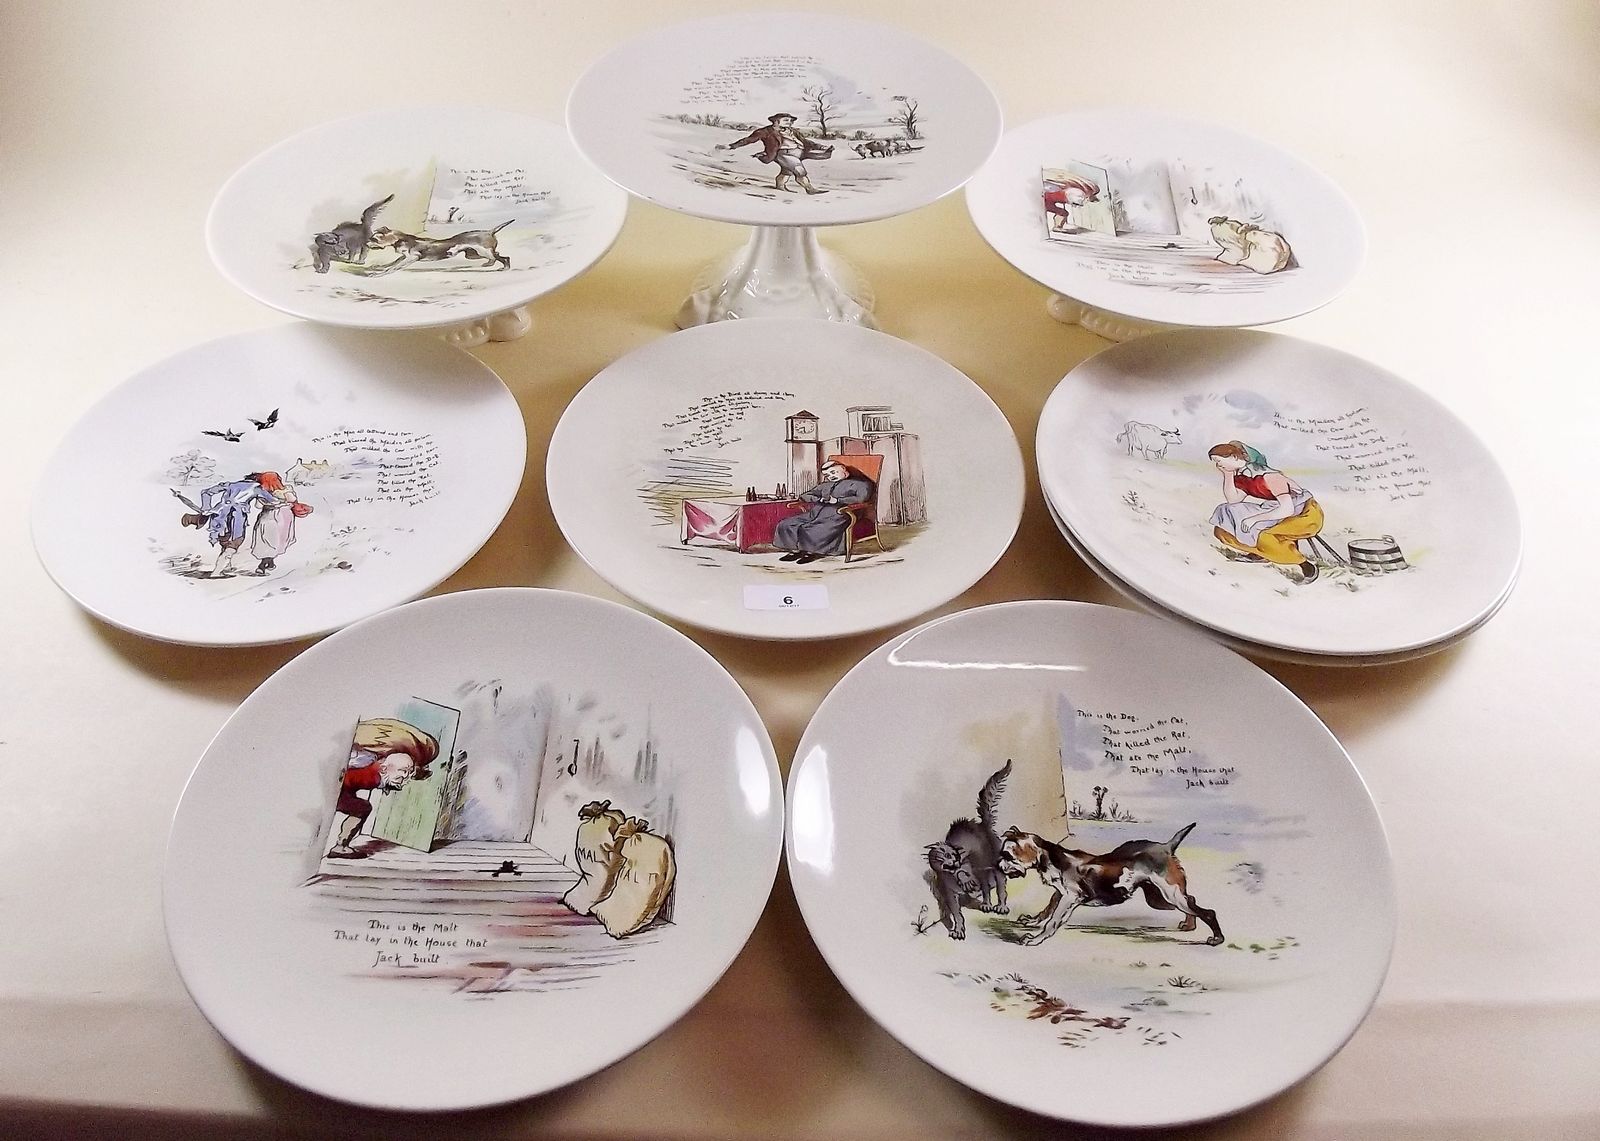 A Bishop and Stomer Nursery Ware dessert service comprising six plates and three comports printed "